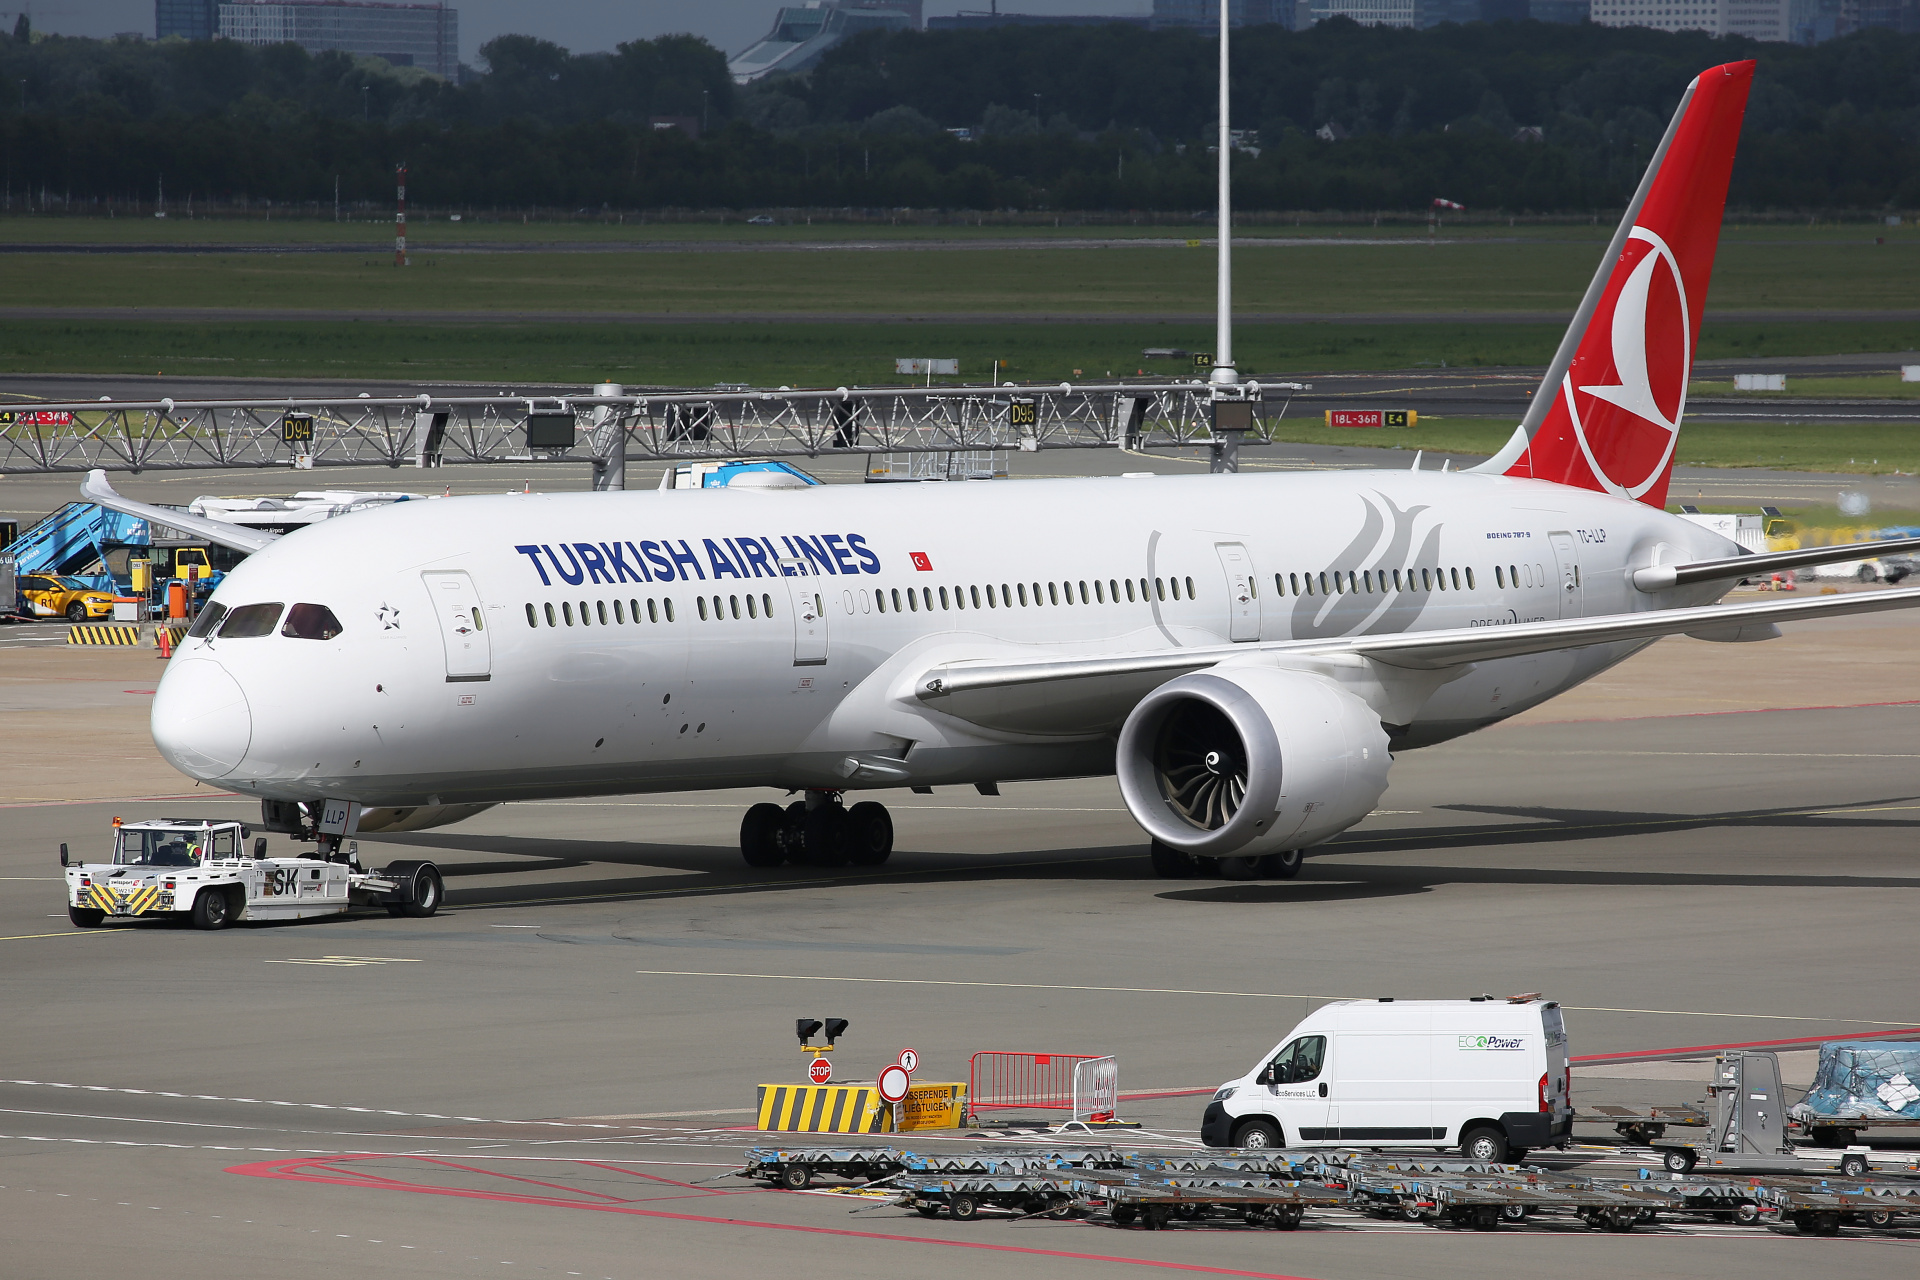 TC-LLP, THY Turkish Airlines (Aircraft » Schiphol Spotting » Boeing 787-9 Dreamliner)